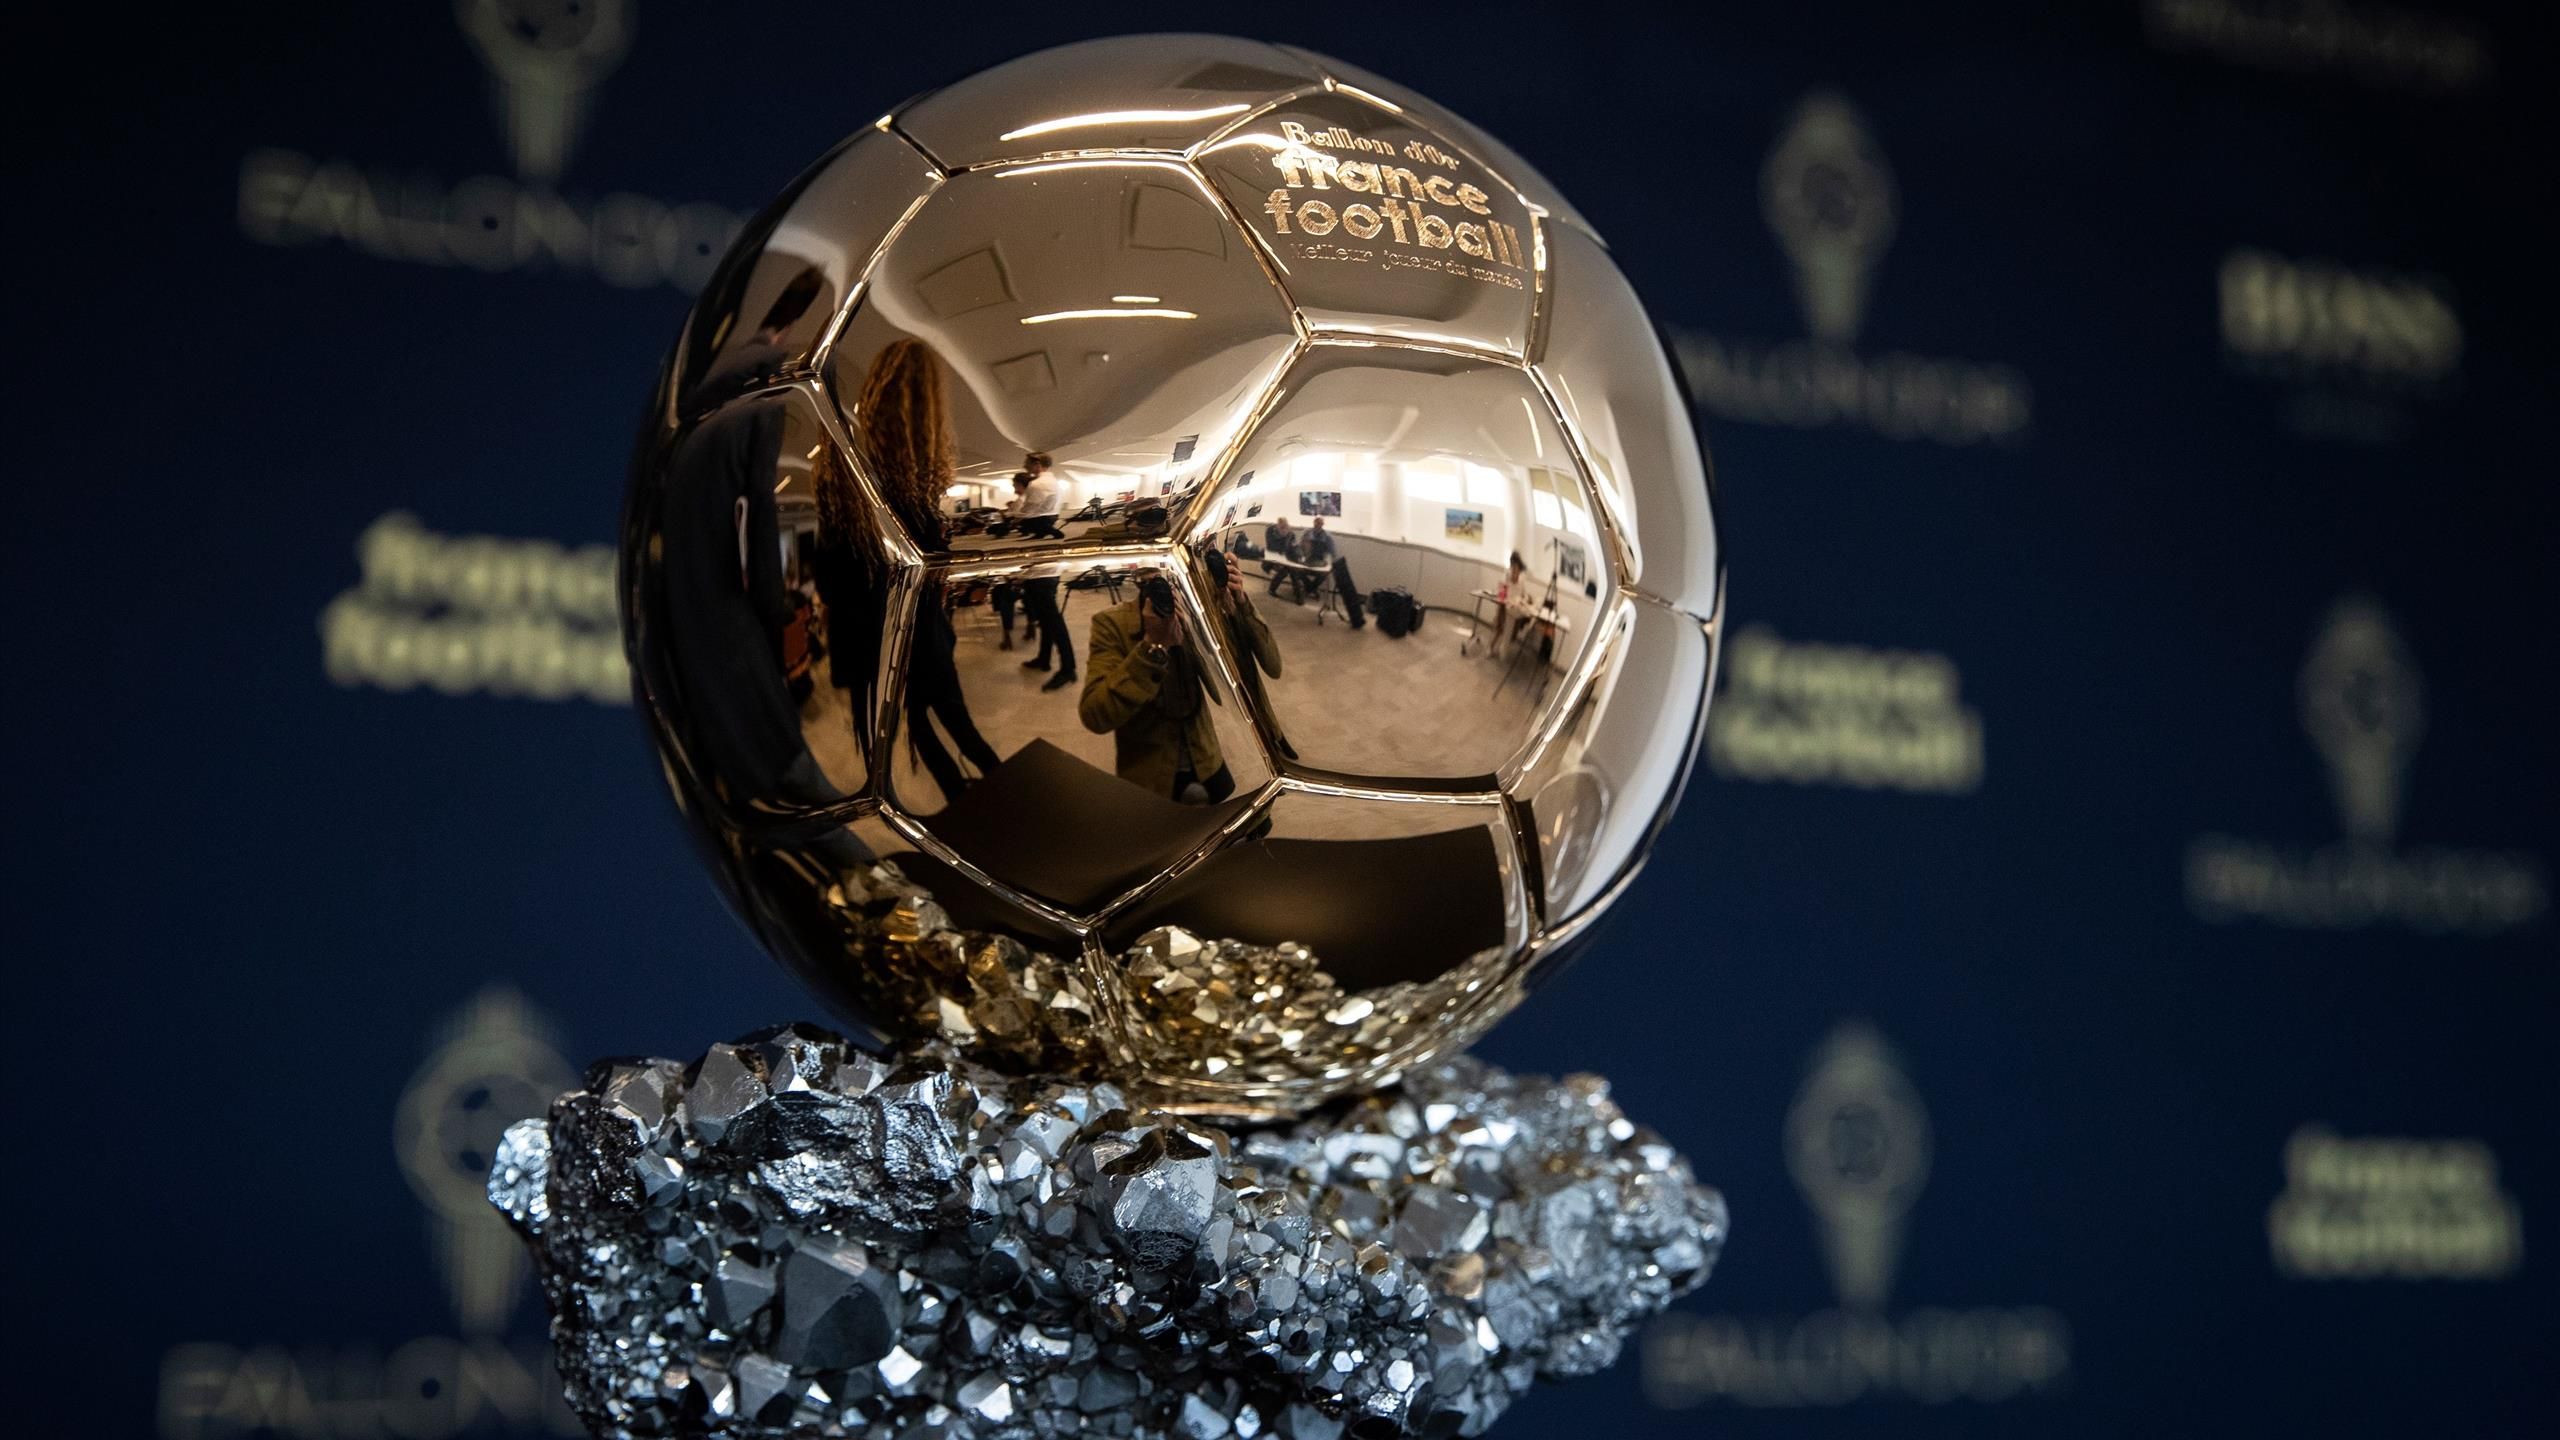 Messi for the eighth time?  Will Bellingham and Haaland fall behind?  – All information about the Ballon d’Or in one place